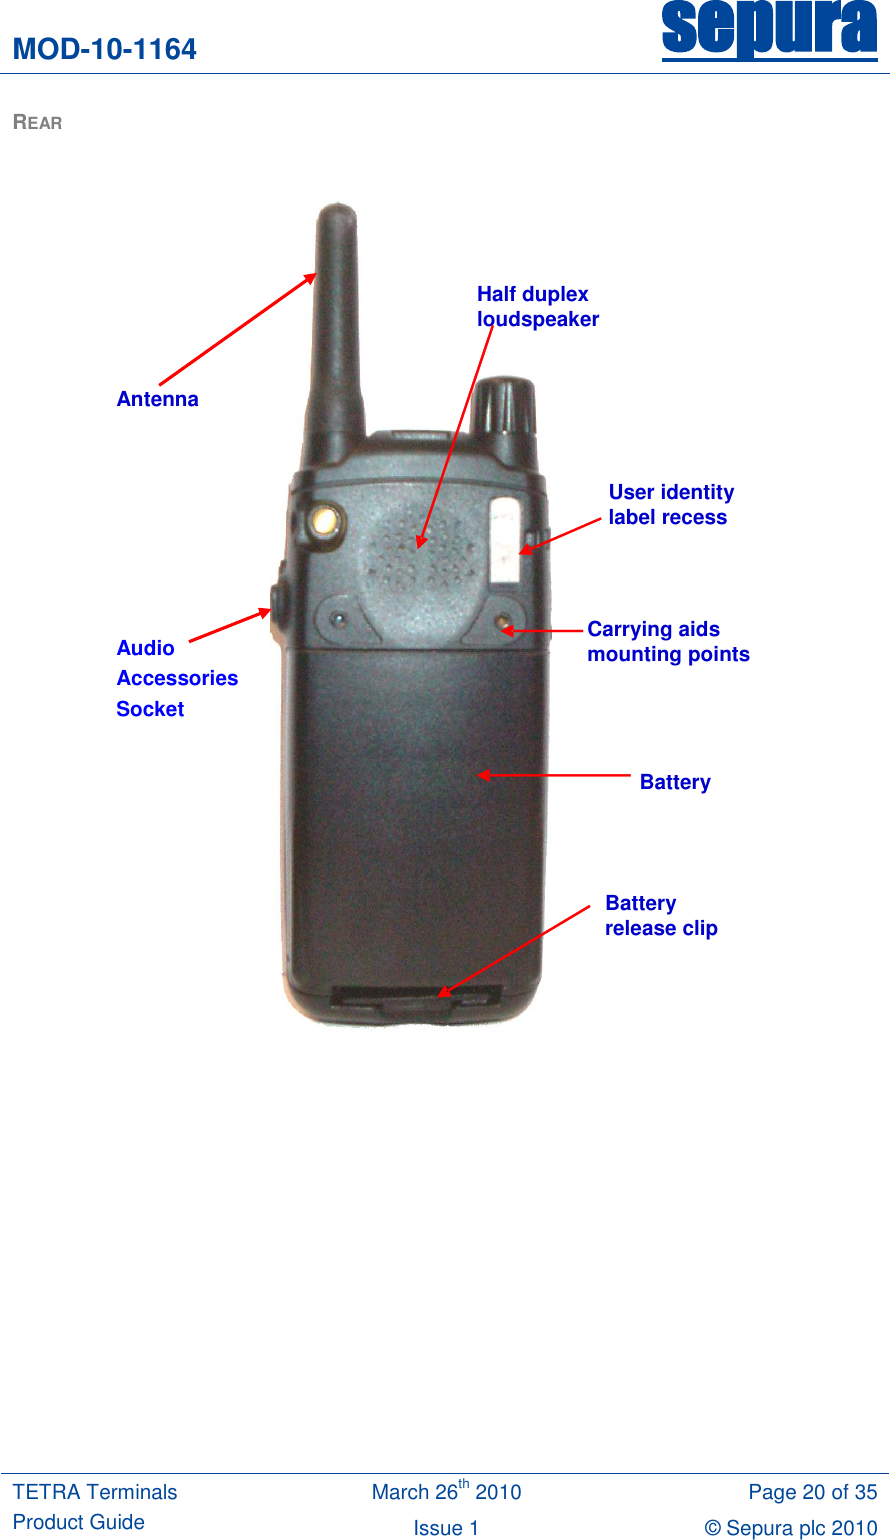 MOD-10-1164 sepura  TETRA Terminals Product Guide March 26th 2010 Page 20 of 35 Issue 1 © Sepura plc 2010   REAR                  Half duplex  loudspeaker Antenna   User identity  label recess Carrying aids  mounting points Battery Battery  release clip Audio Accessories Socket 